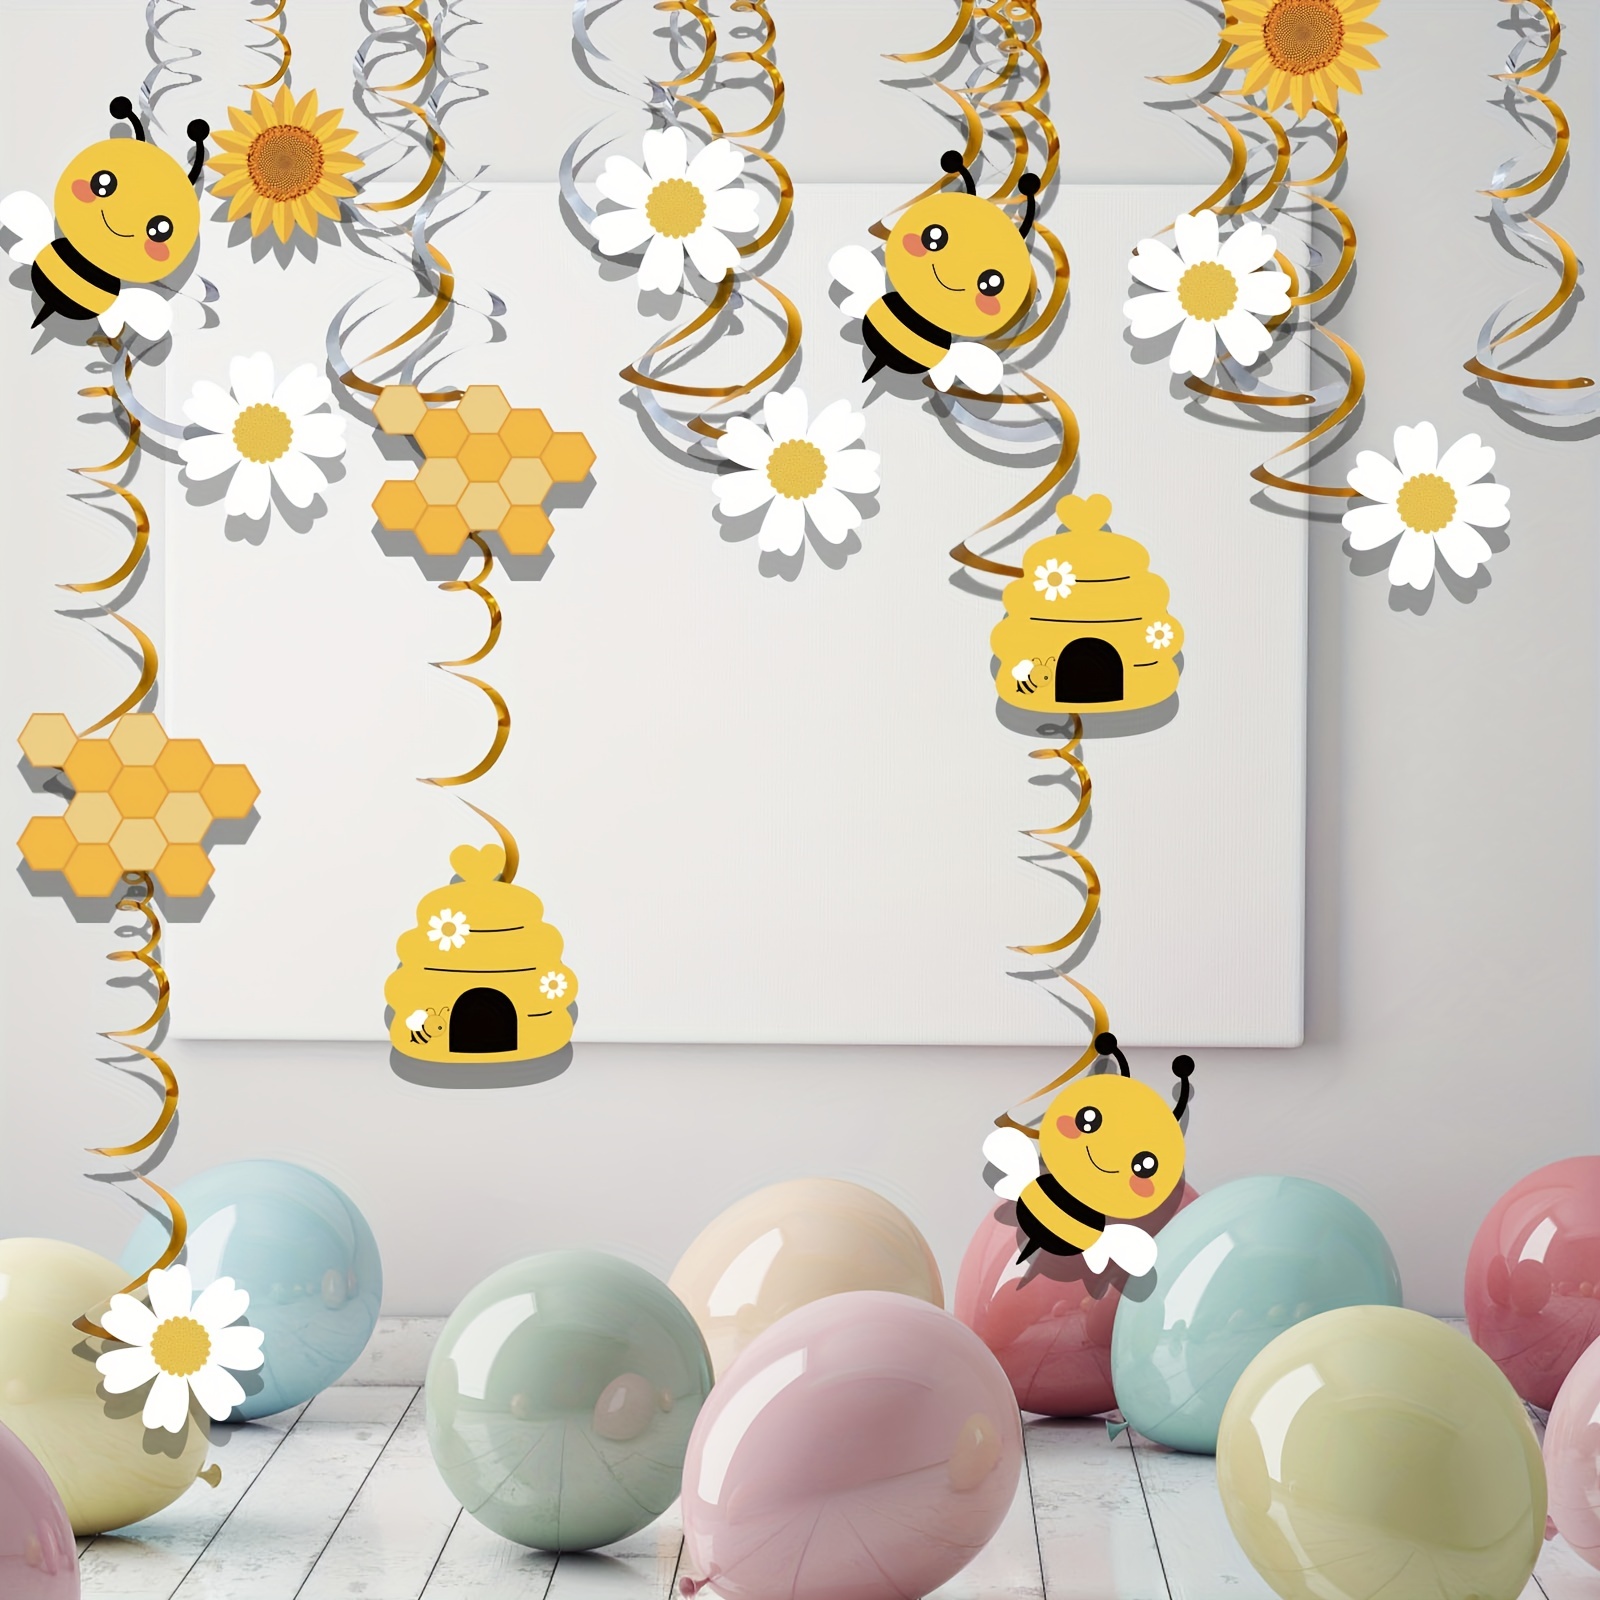 30 Pieces Bee Hanging Swirl Decorations, Yellow Black Sweet as Can Honey  Bee Birthday Party Foil Ceiling for Bee Birthday Party Gender Reveal Party